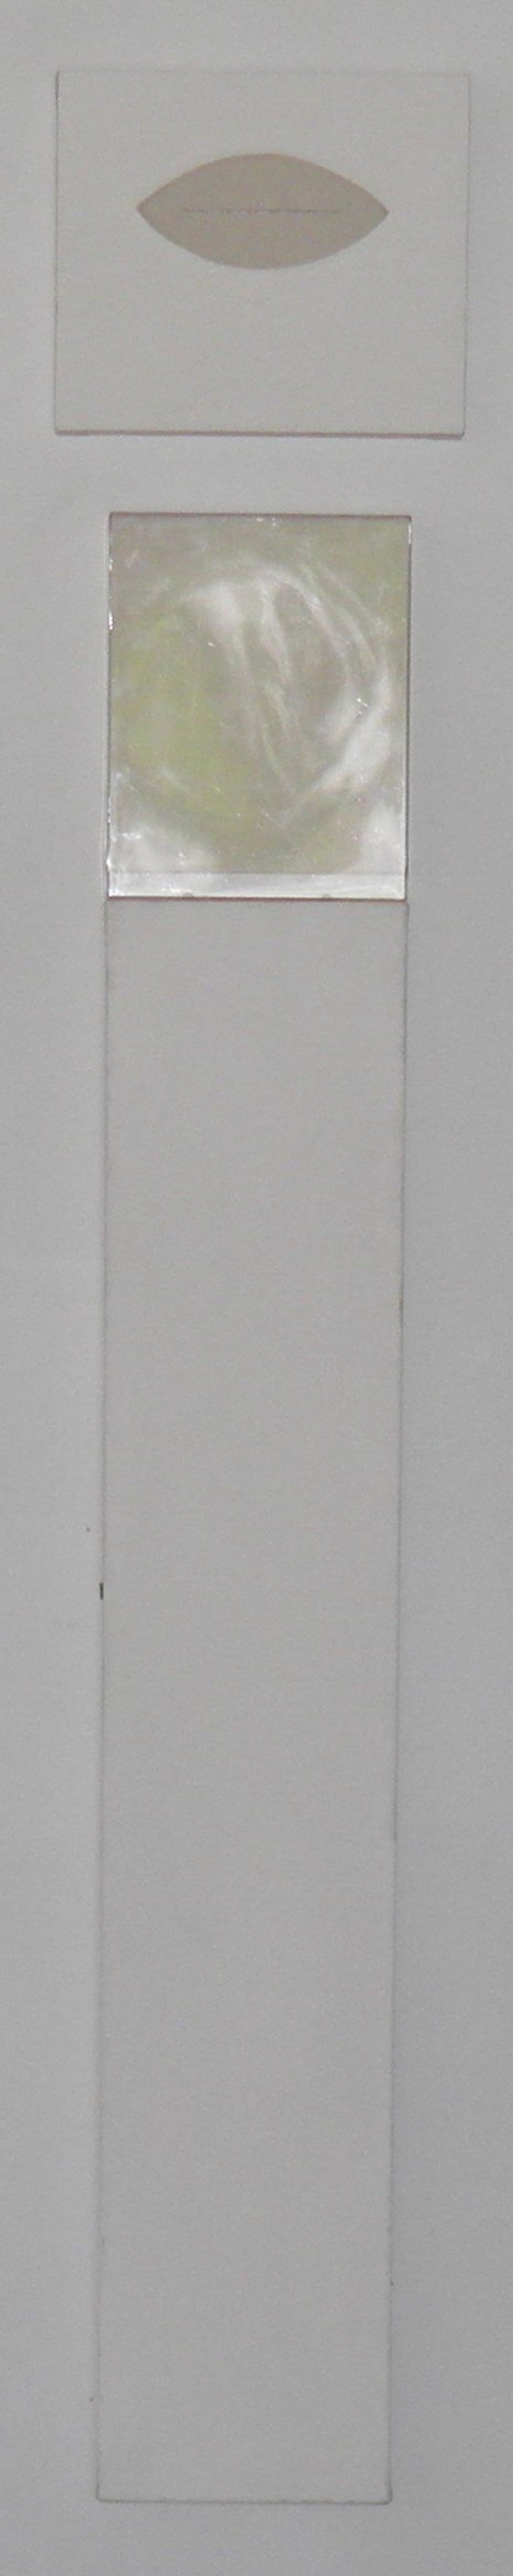 Ronn Jaffe ‘Known’ Minimalist Conceptual Painting from Mind Gap Journey, 2008 For Sale 1